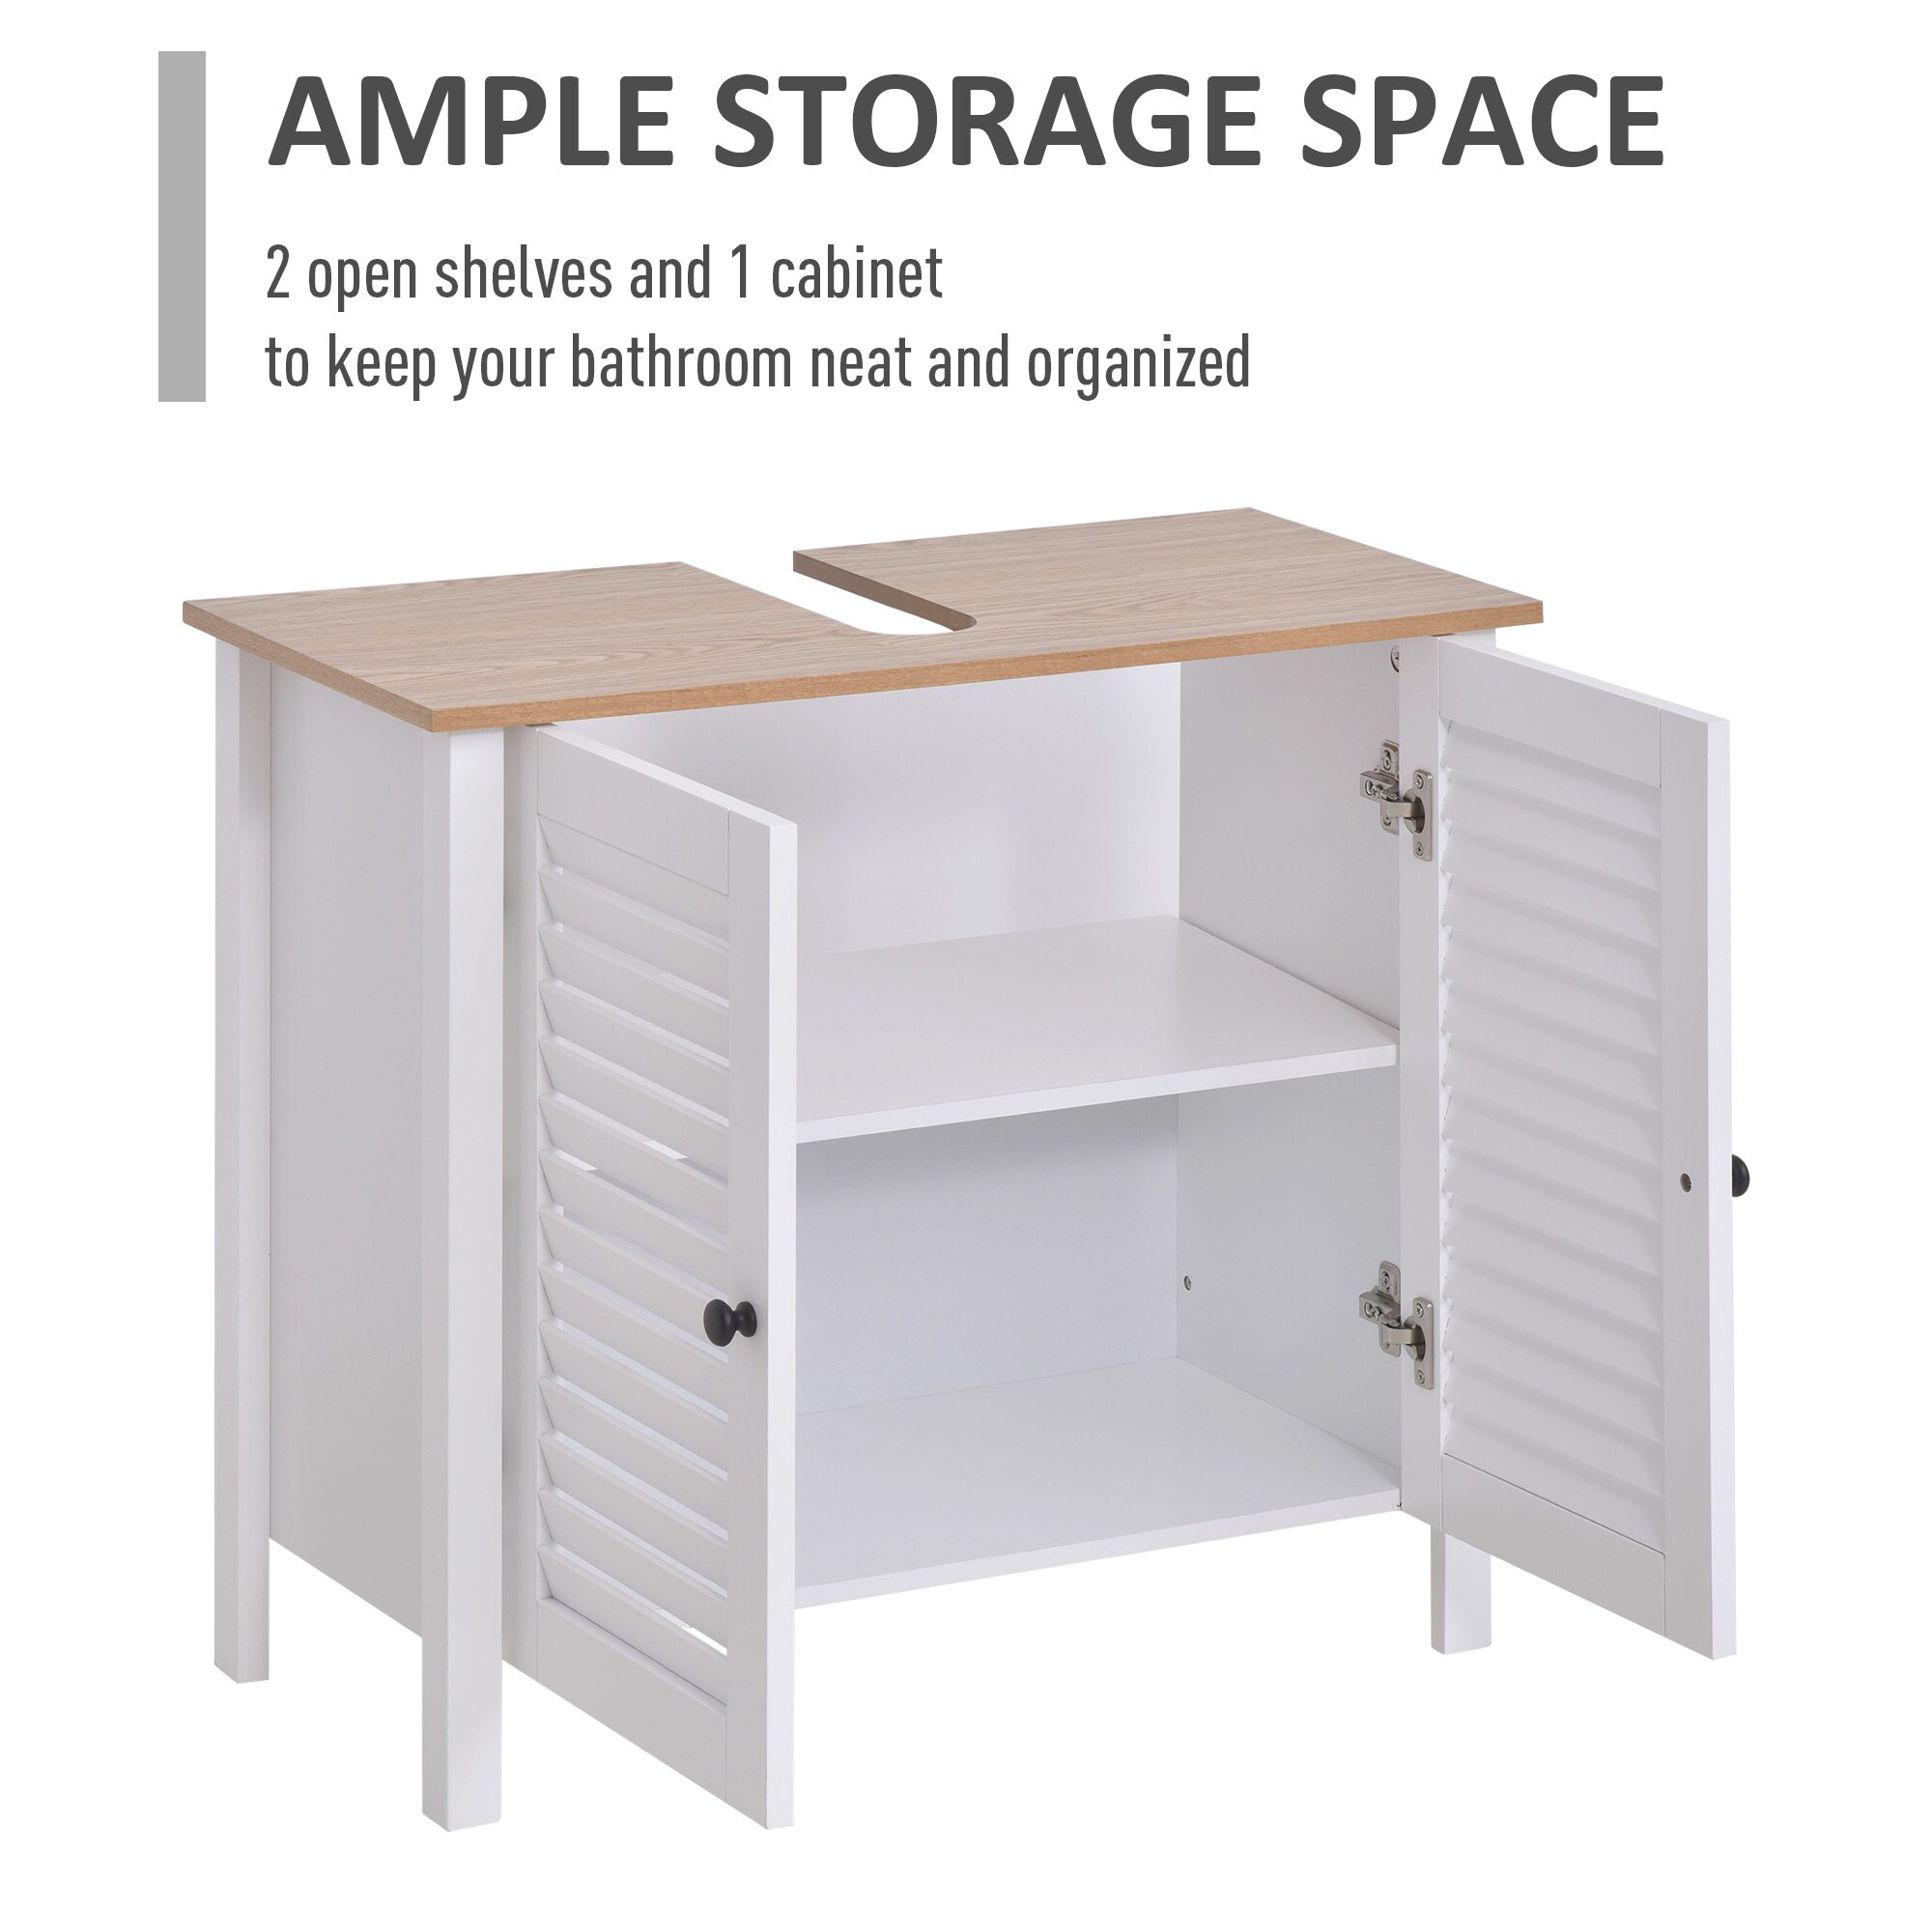 https://ak1.ostkcdn.com/images/products/is/images/direct/1be3bfdd0f426302c0036581d67c8260e5fed59f/HOMCOM-Under-Sink-Storage-Cabinet-with-Double-Layers-Bathroom-Cabinet-Space-Saver-Organizer-2-Door-Floor-Cabinet%2C-White.jpg